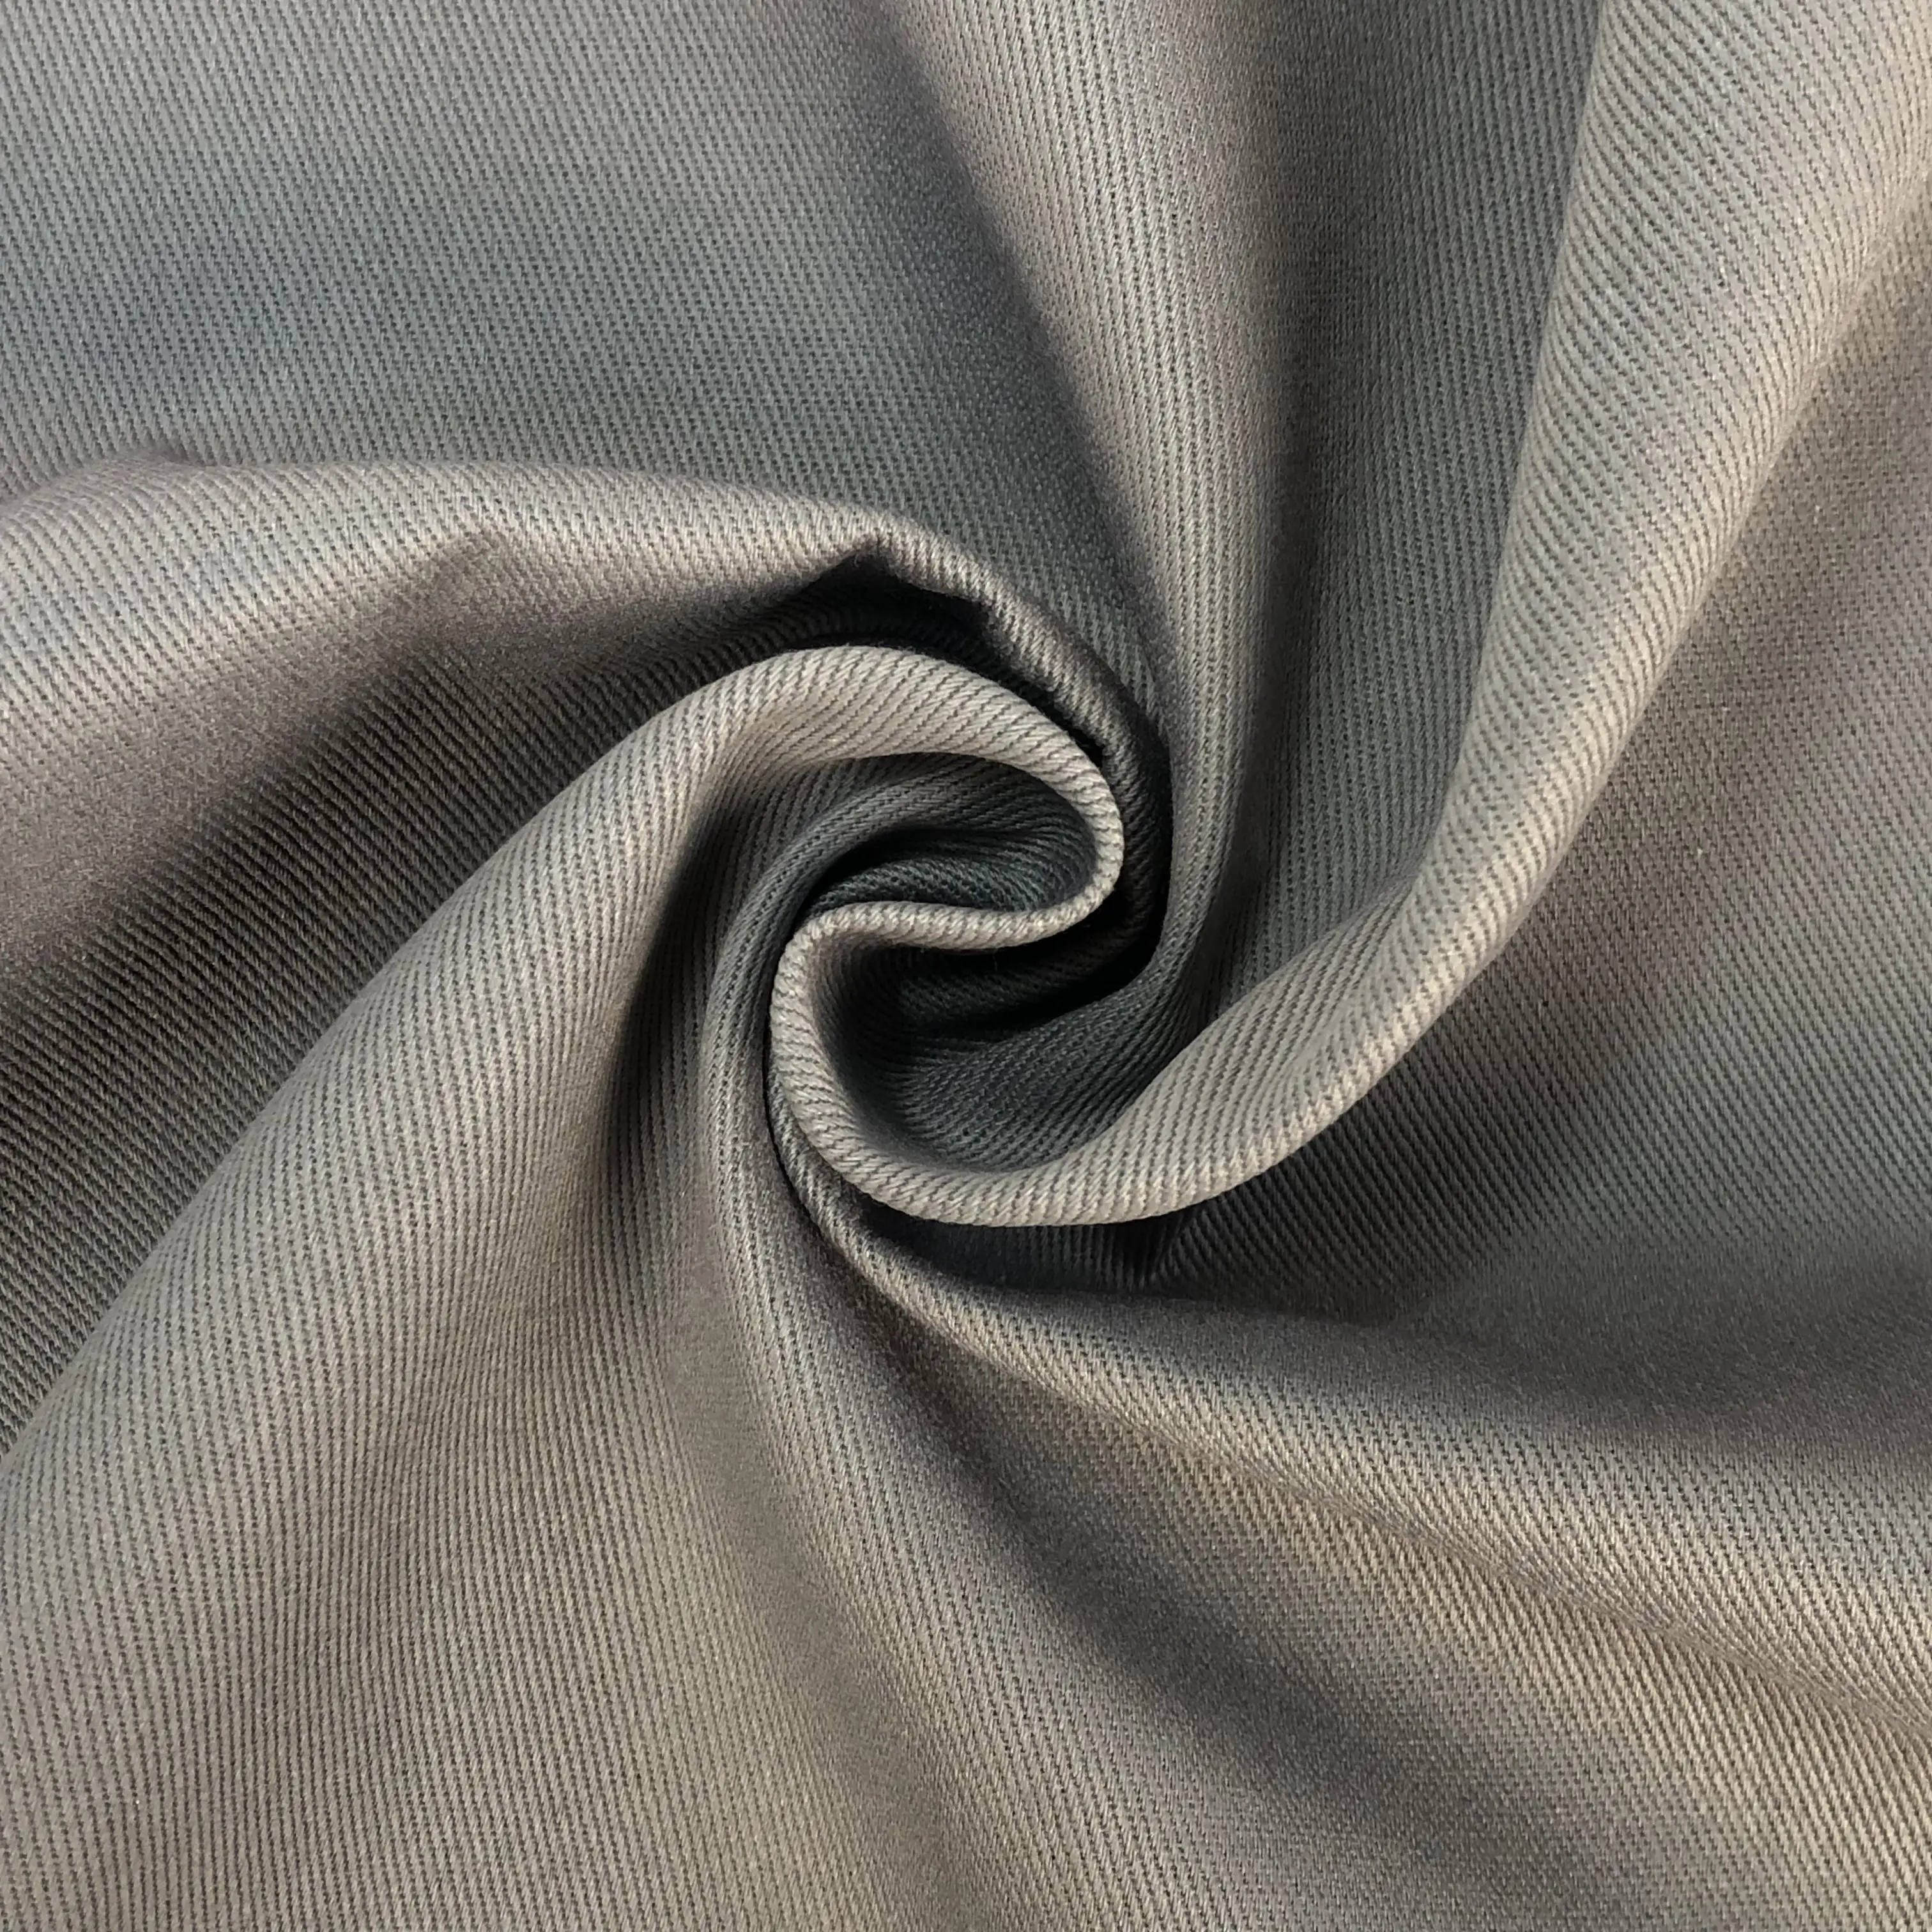 Polyester/cotton TC Twill 65 polyester 35 cotton fabric for medical uniforms